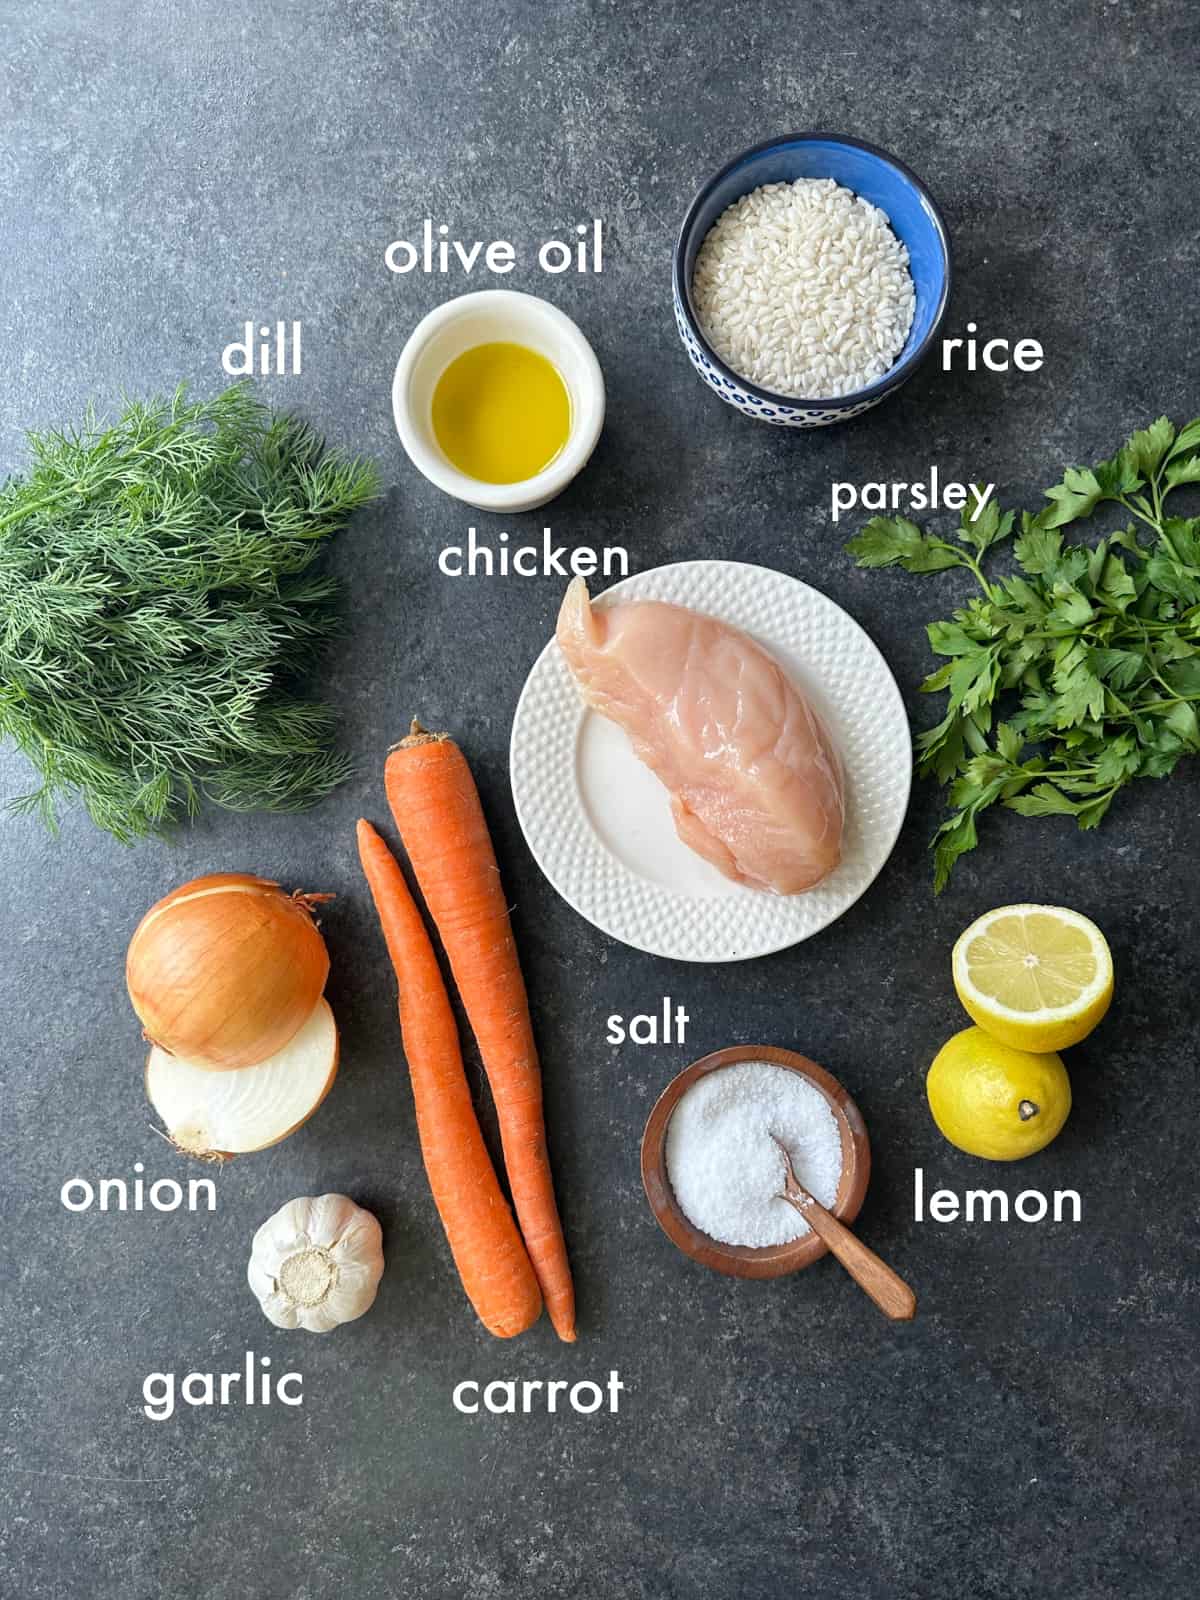 To make this recipe you need olive oil, onion, garic, carrots, chicken, lemon, rice, herbs and salt. 